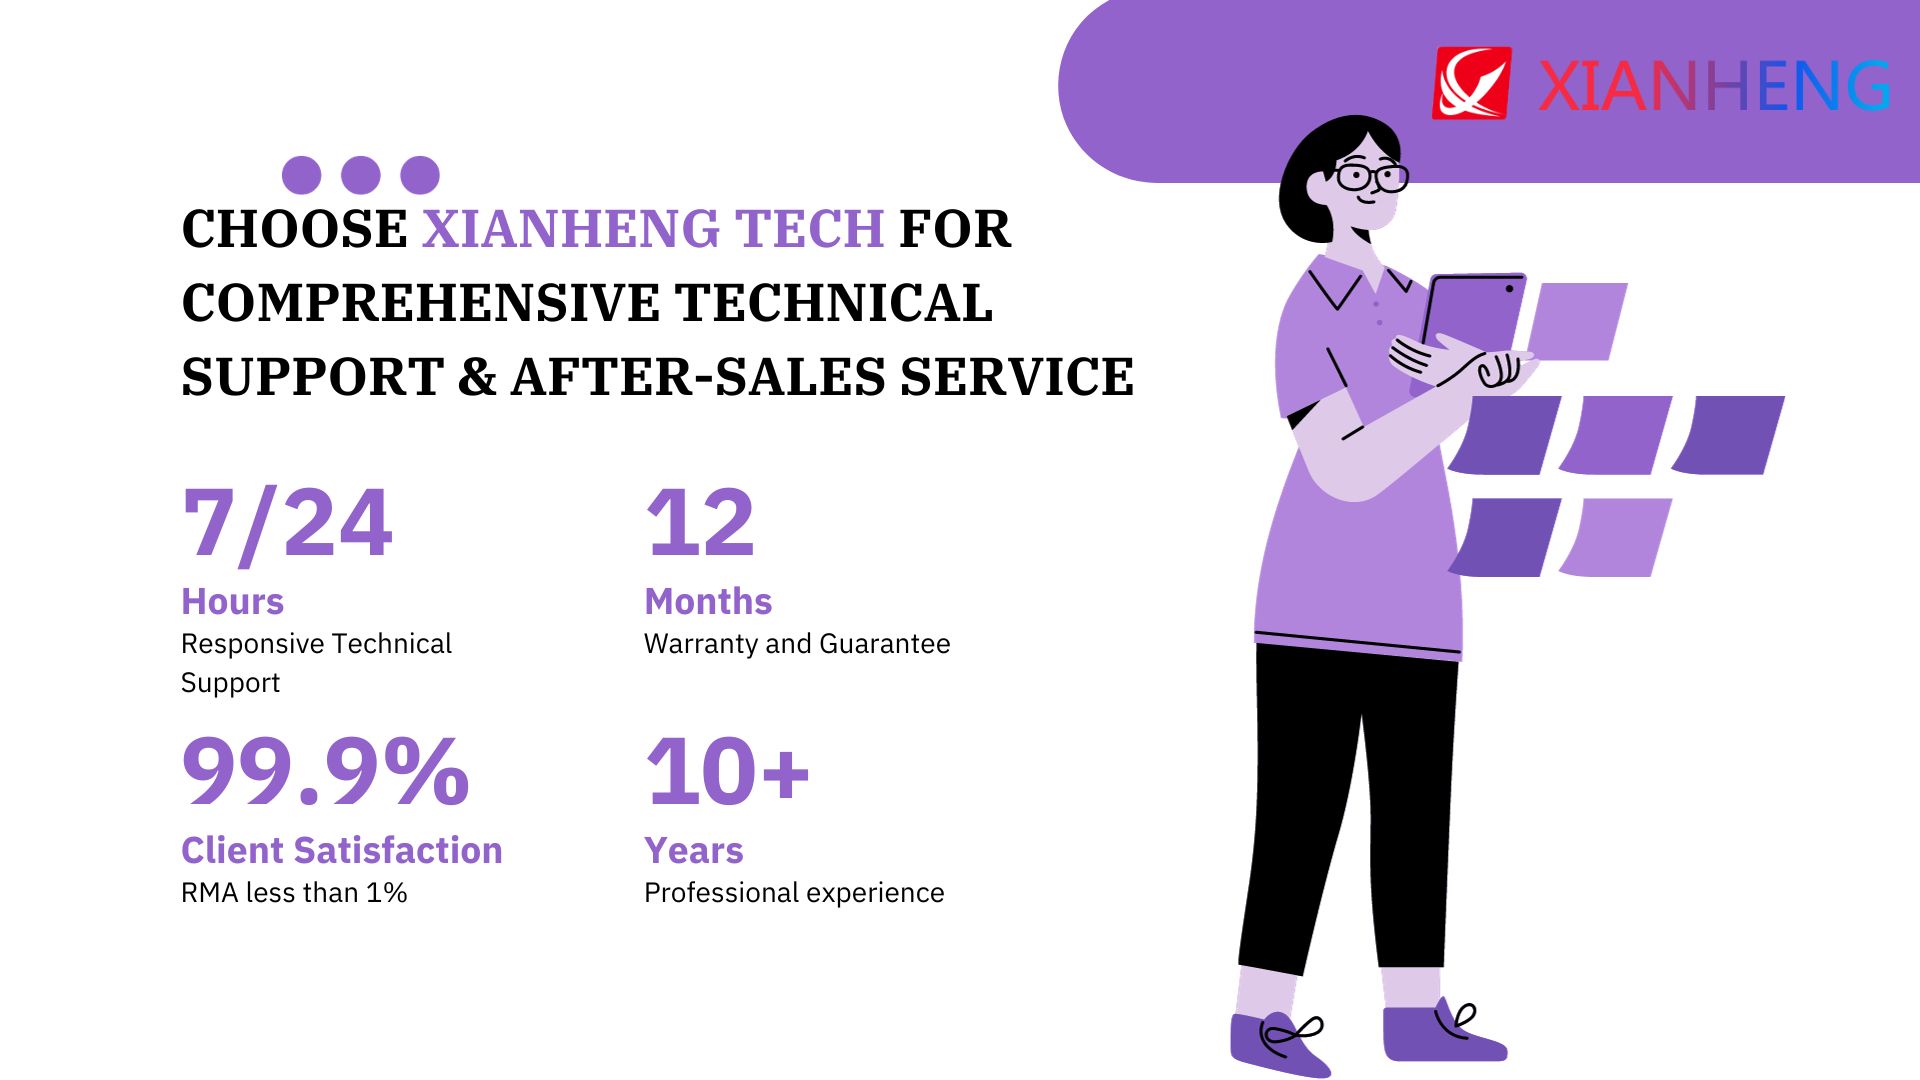 Choose XIANHENG TECH for Comprehensive Technical Support & After-Sales Service